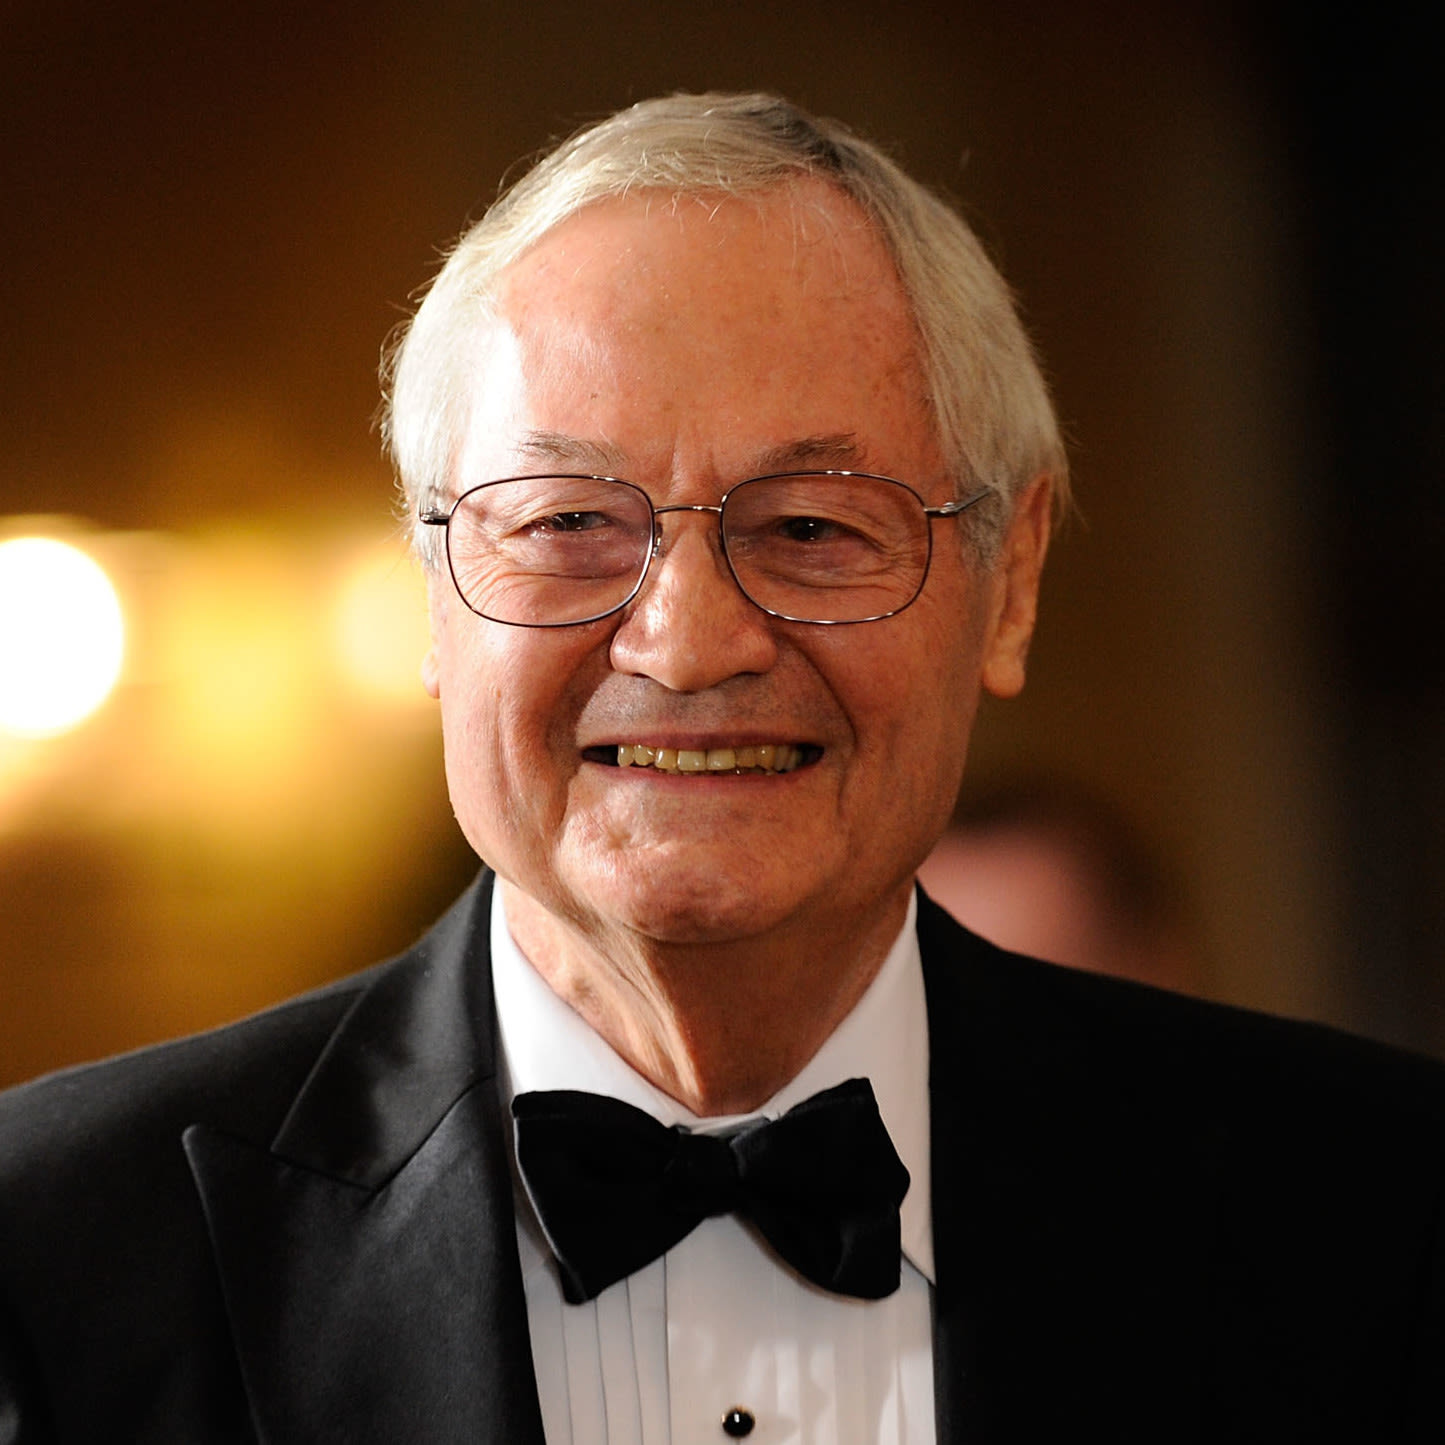 Roger Corman, the B-movie legend who launched A-list careers, dies at 98